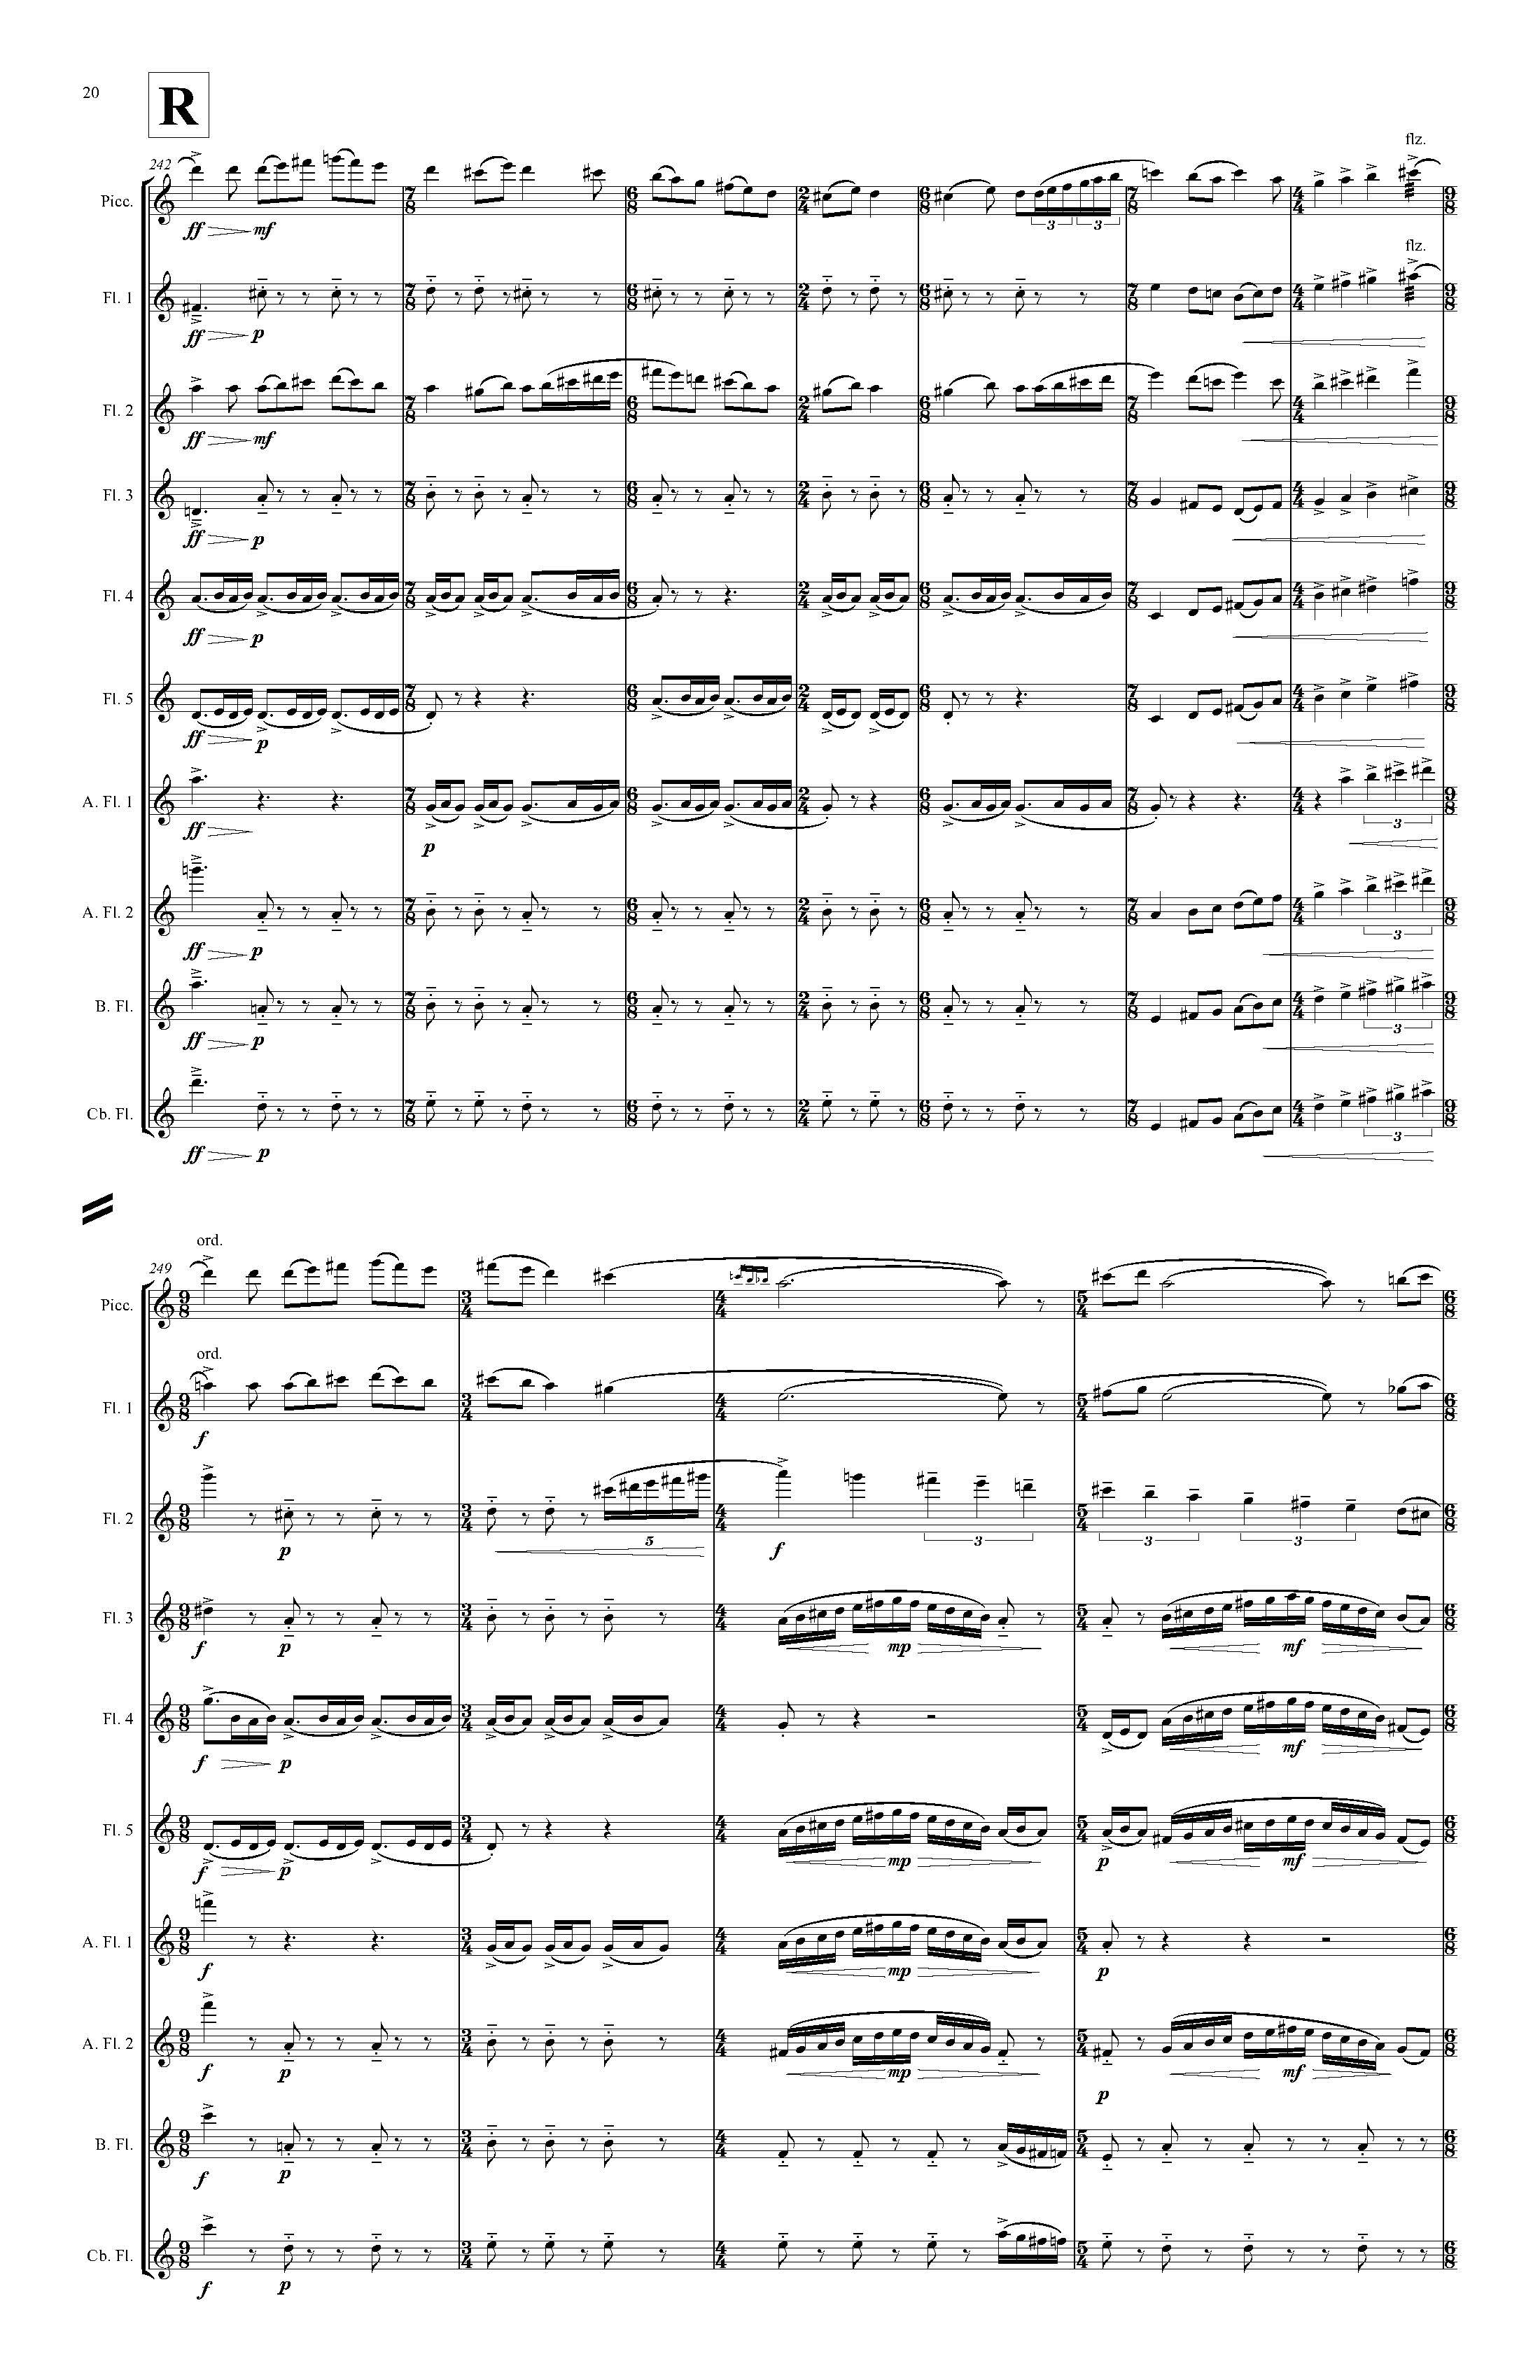 PIPES - Complete Score_Page_26.jpg